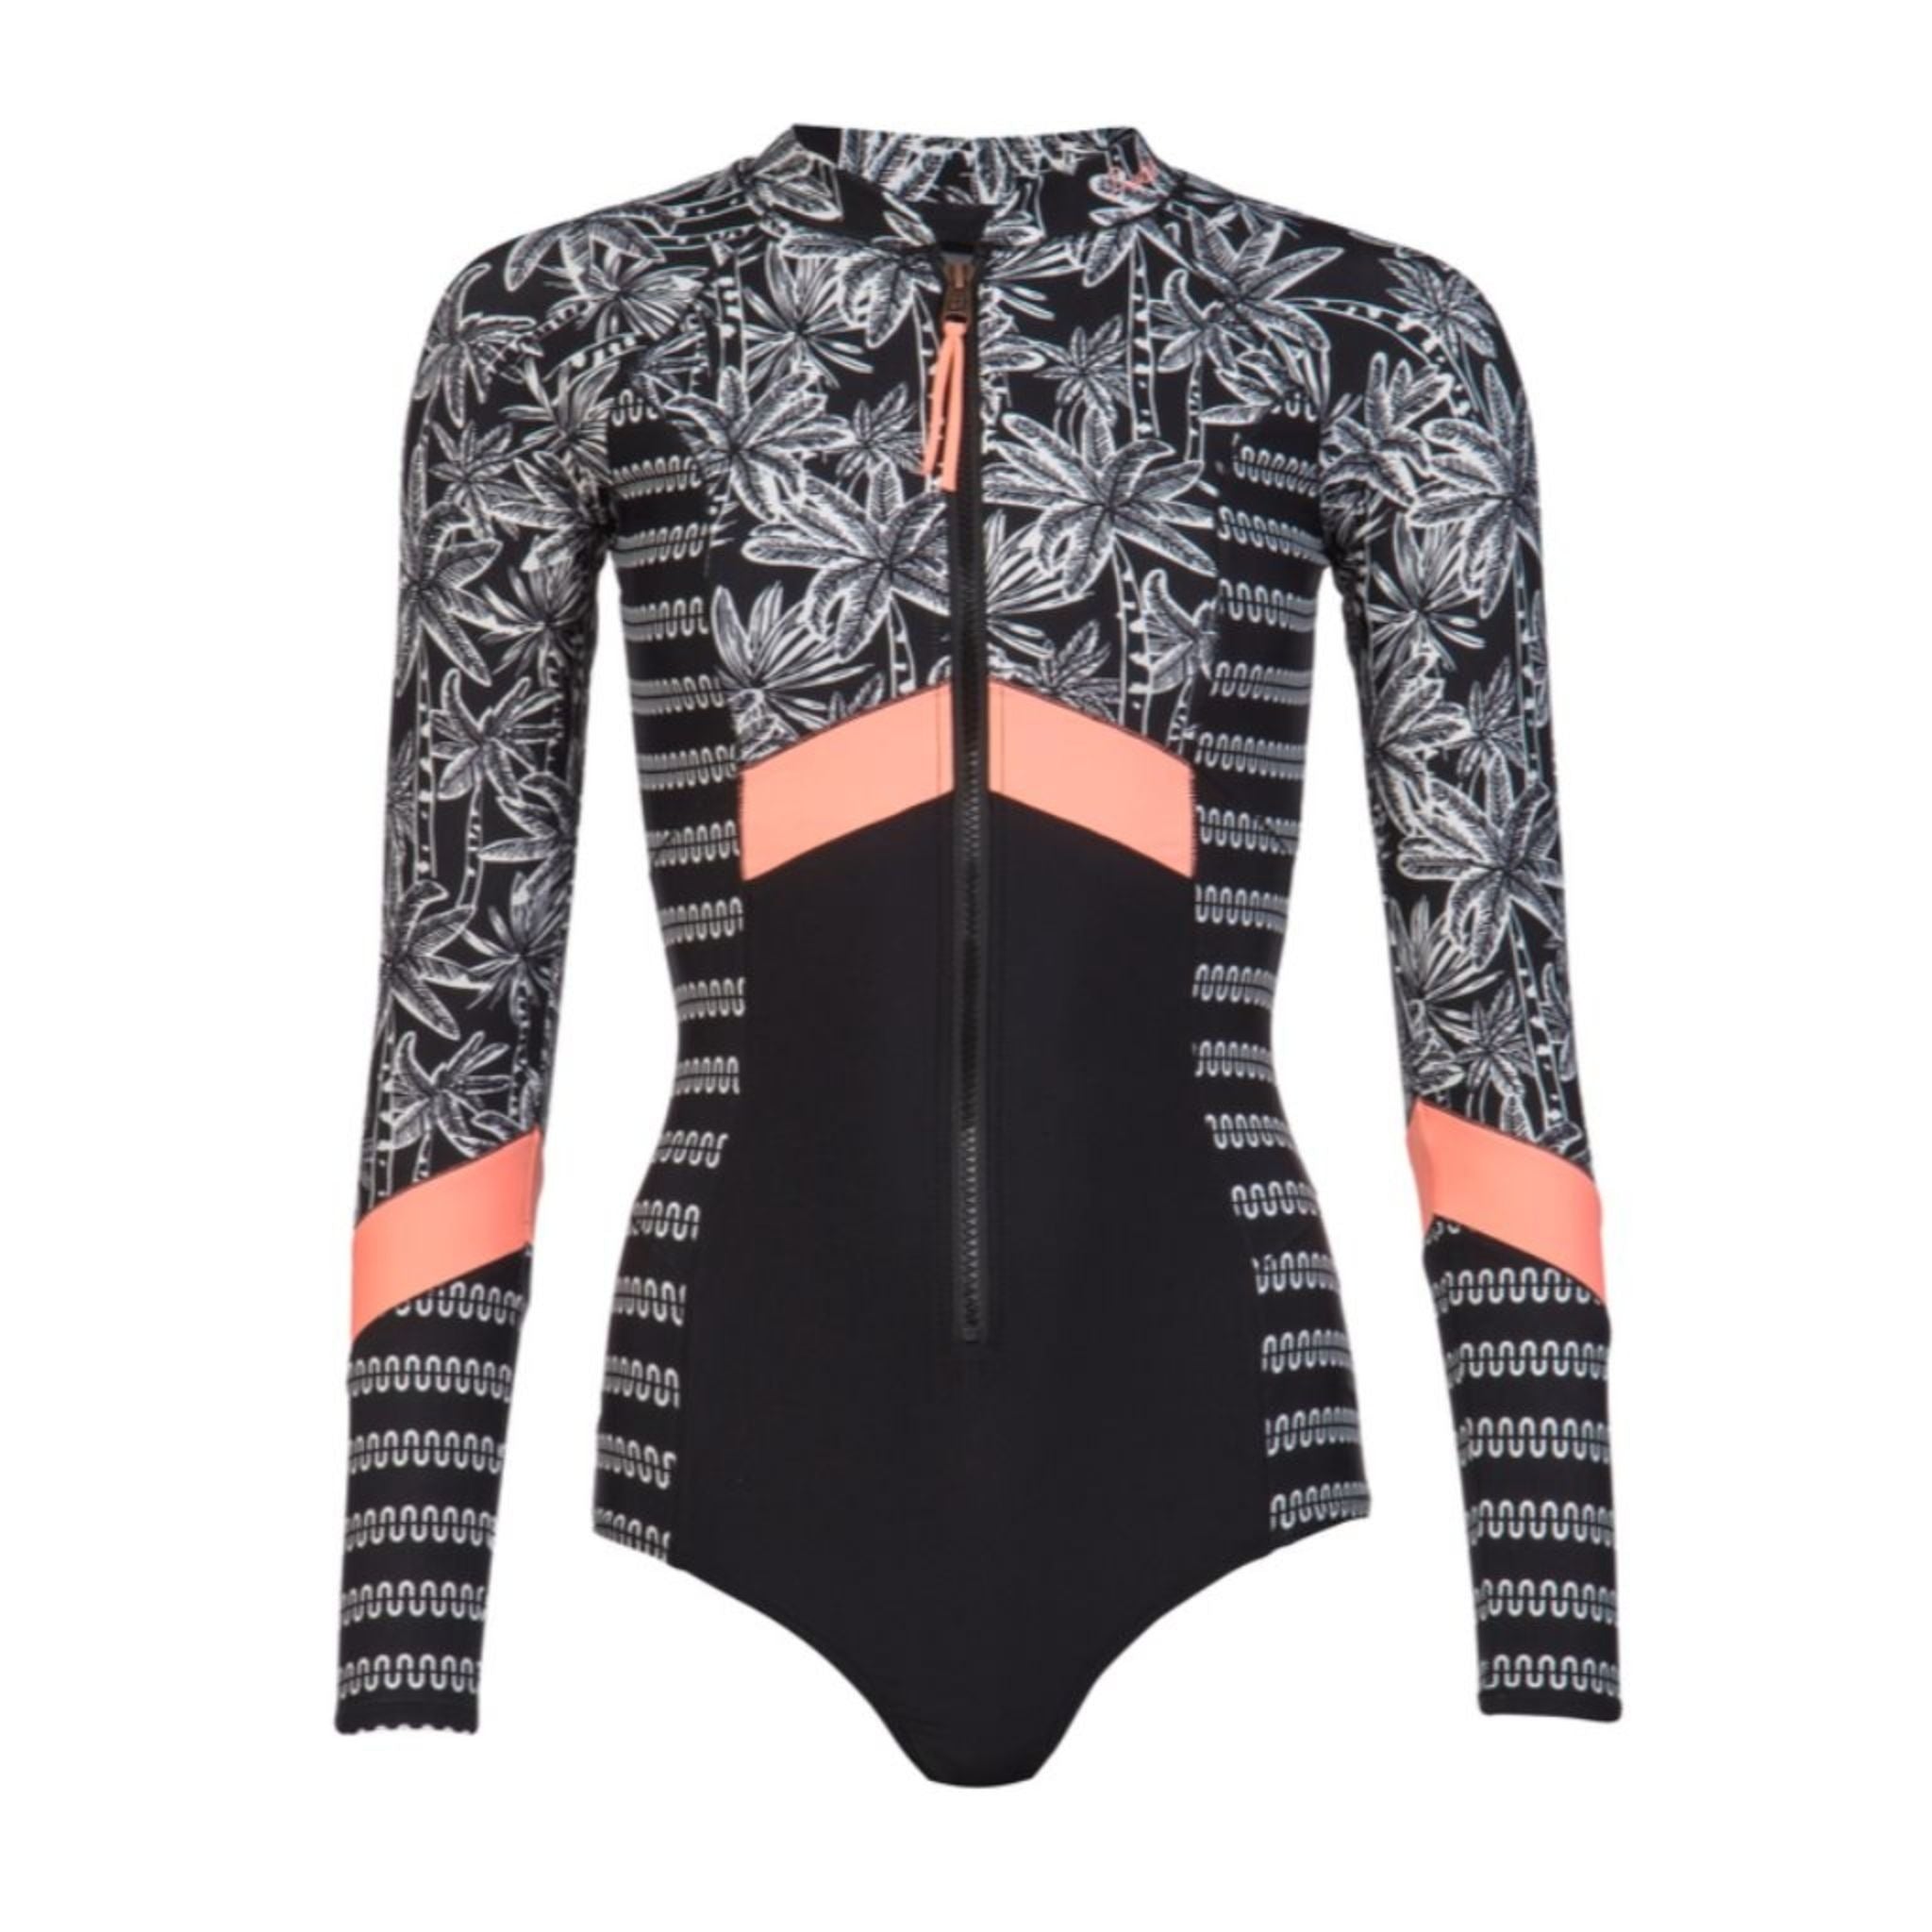 Protest Womens Myway Surf Suit